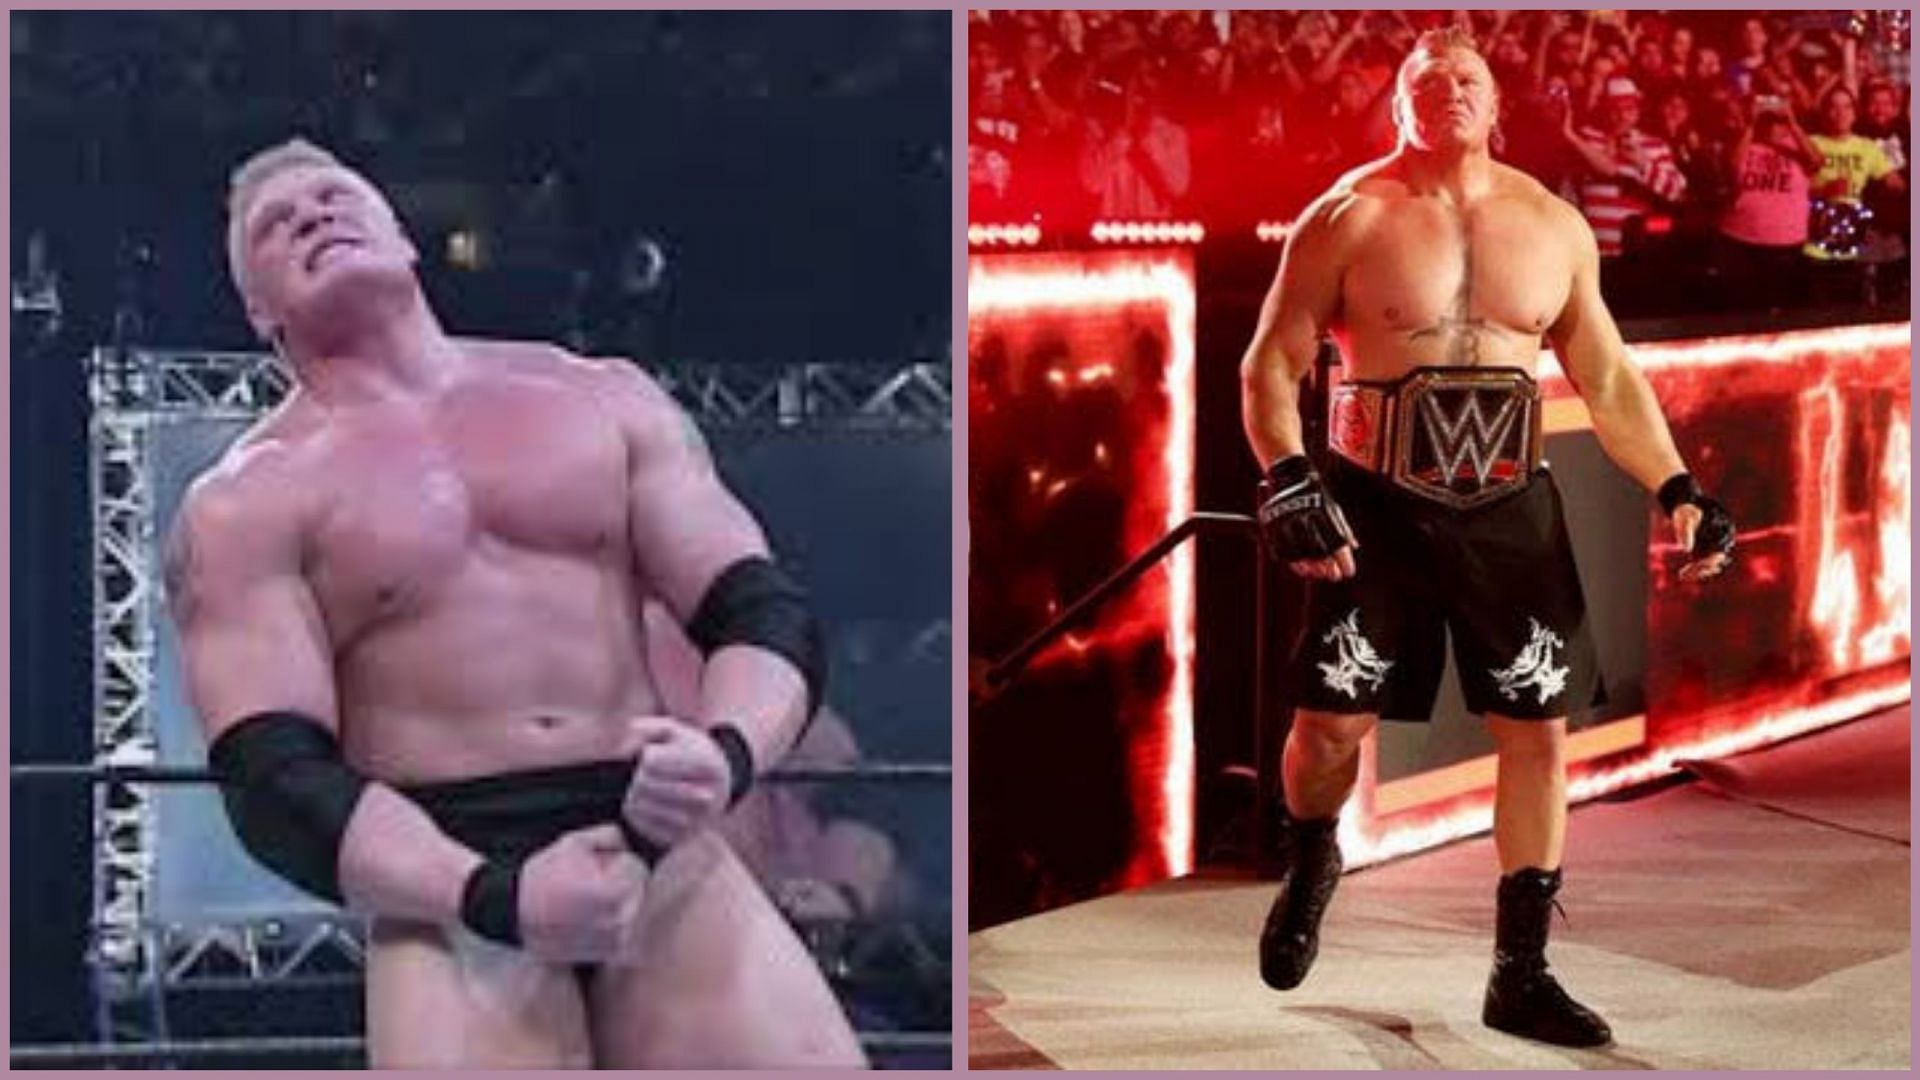 Brock Lesnar has entered the Royal Rumble four times